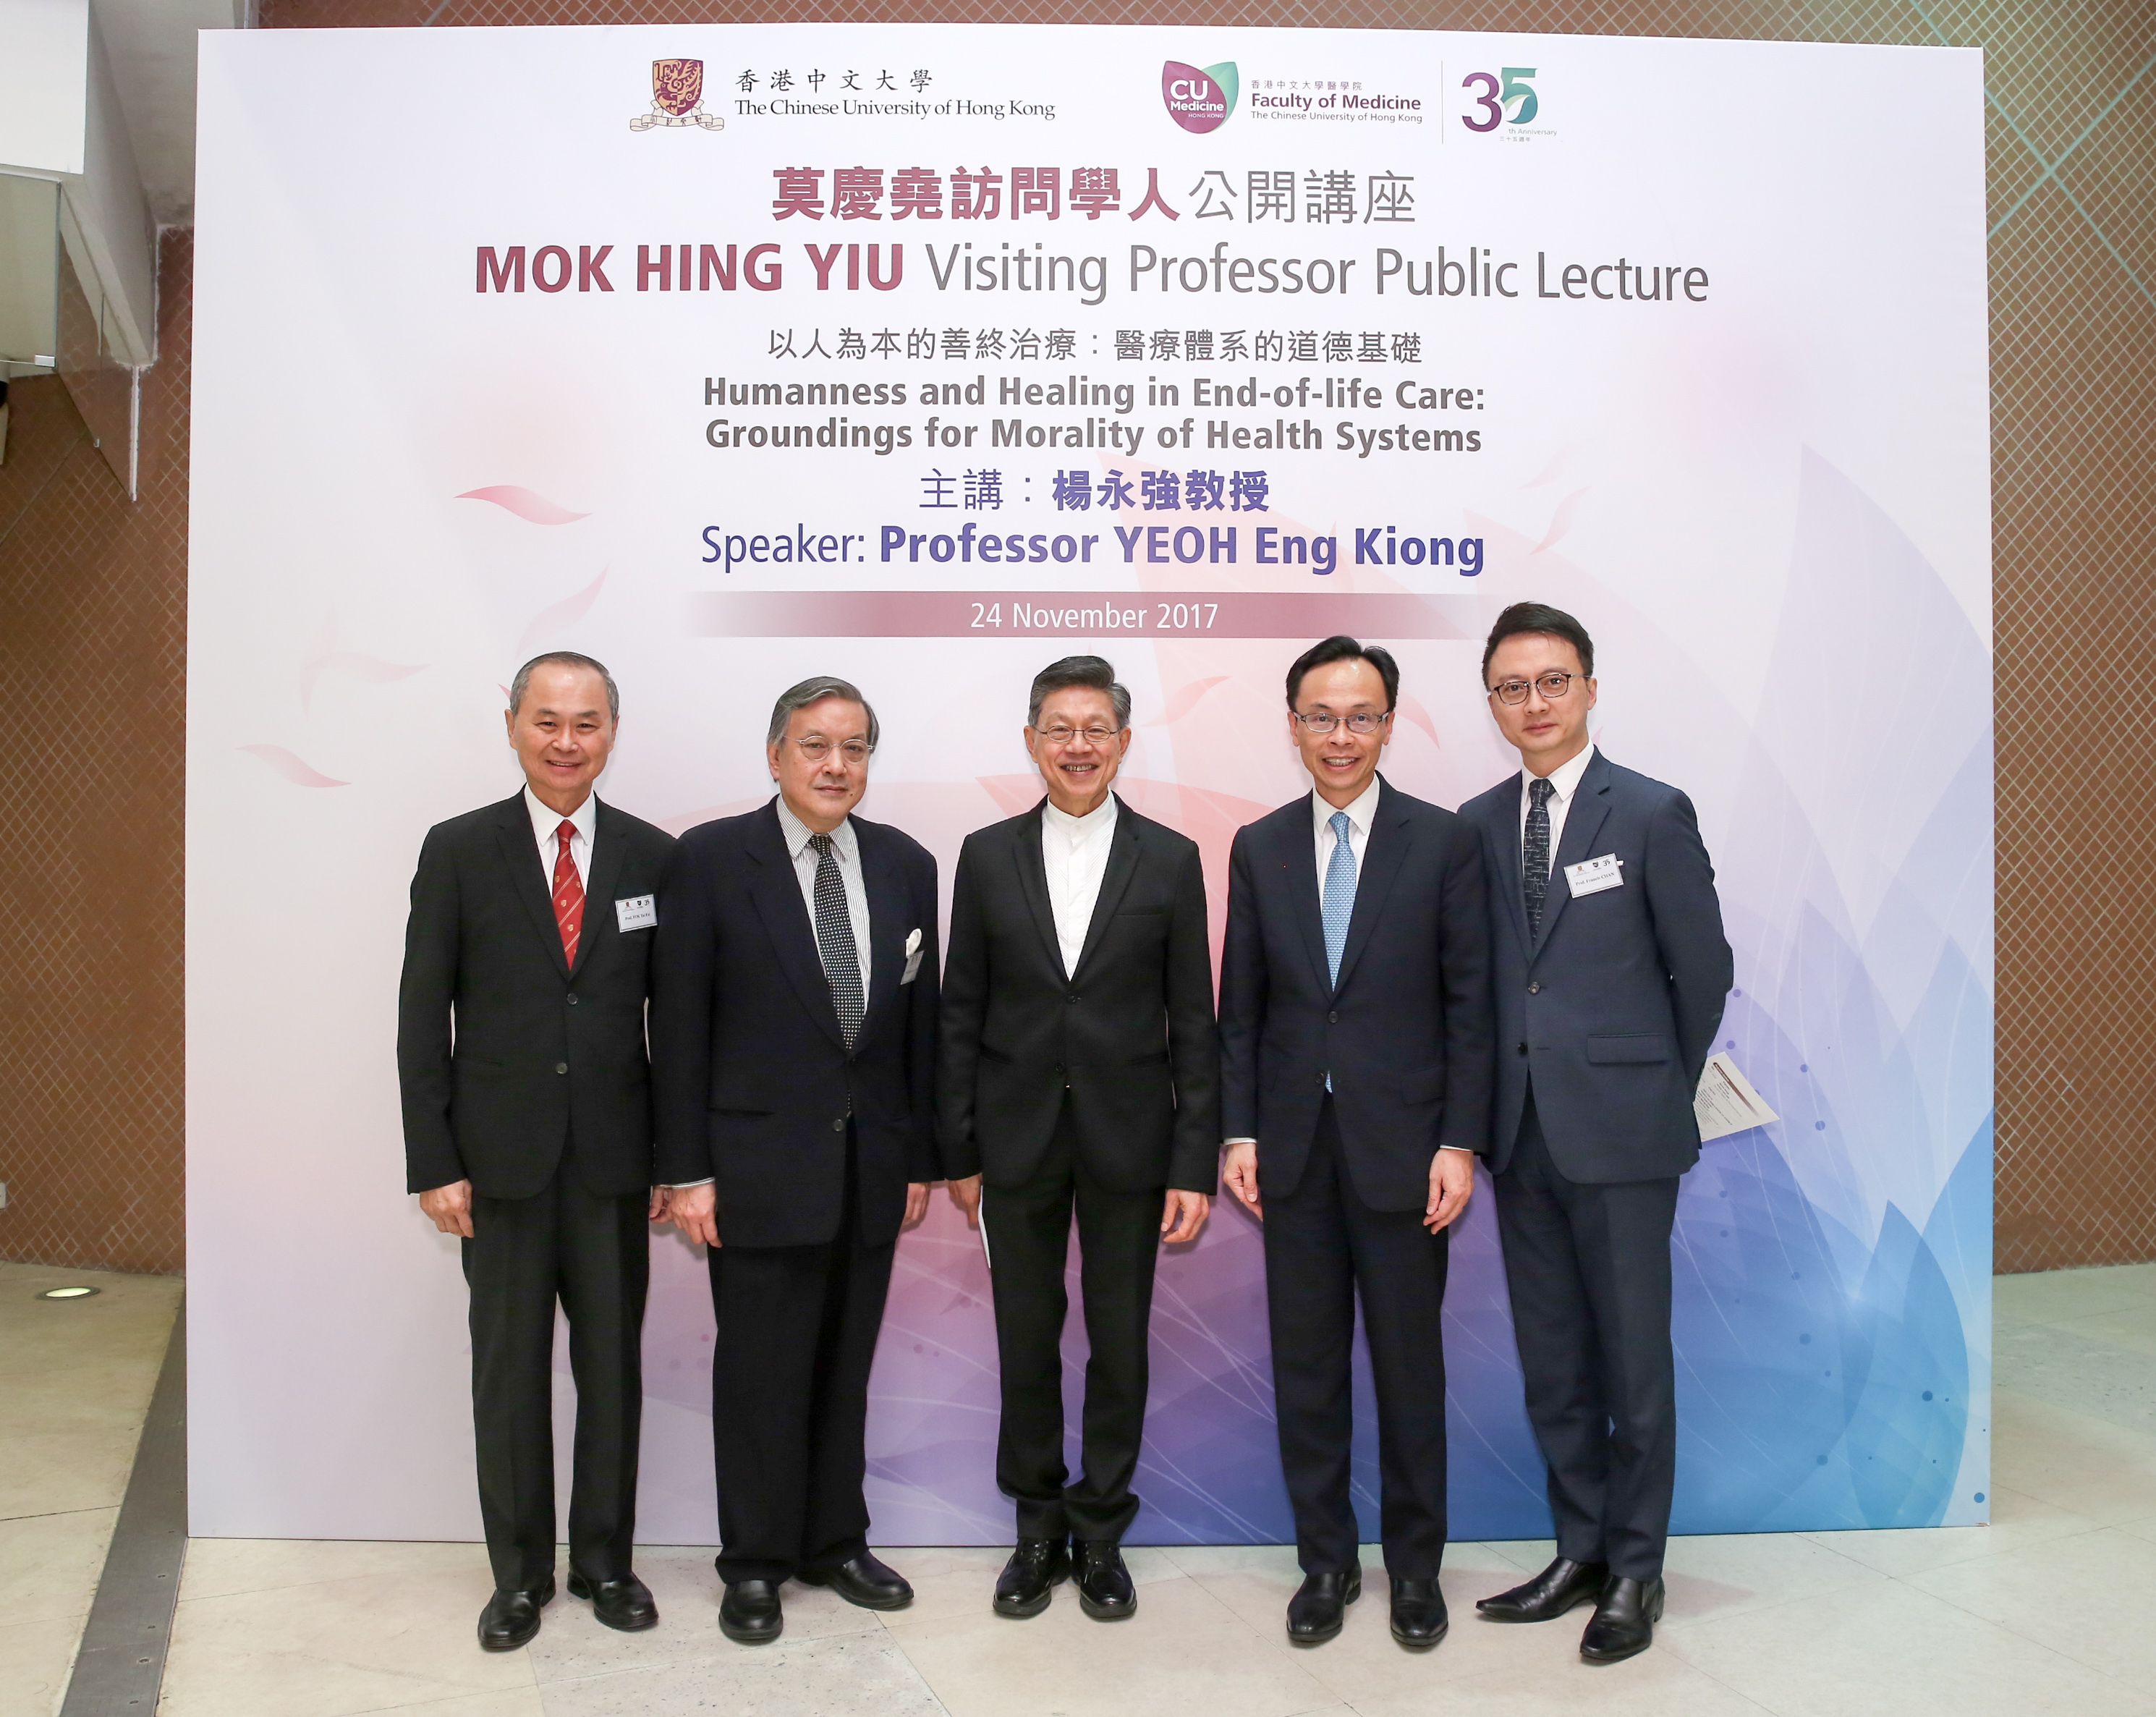  (From left) Prof. FOK Tai-fai, Pro-Vice-Chancellor, CUHK; Mr. Christopher MOK, representative of Mok Hing Yiu Charitable Foundation; Prof. YEOH Eng Kiong, Director of the Jockey Club School of Public Health and Primary Care of the Faculty of Medicine, CUHK; Mr. Patrick NIP, Secretary for Constitutional and Mainland Affairs; and Prof. Francis CHAN, Dean, Faculty of Medicine, CUHK.